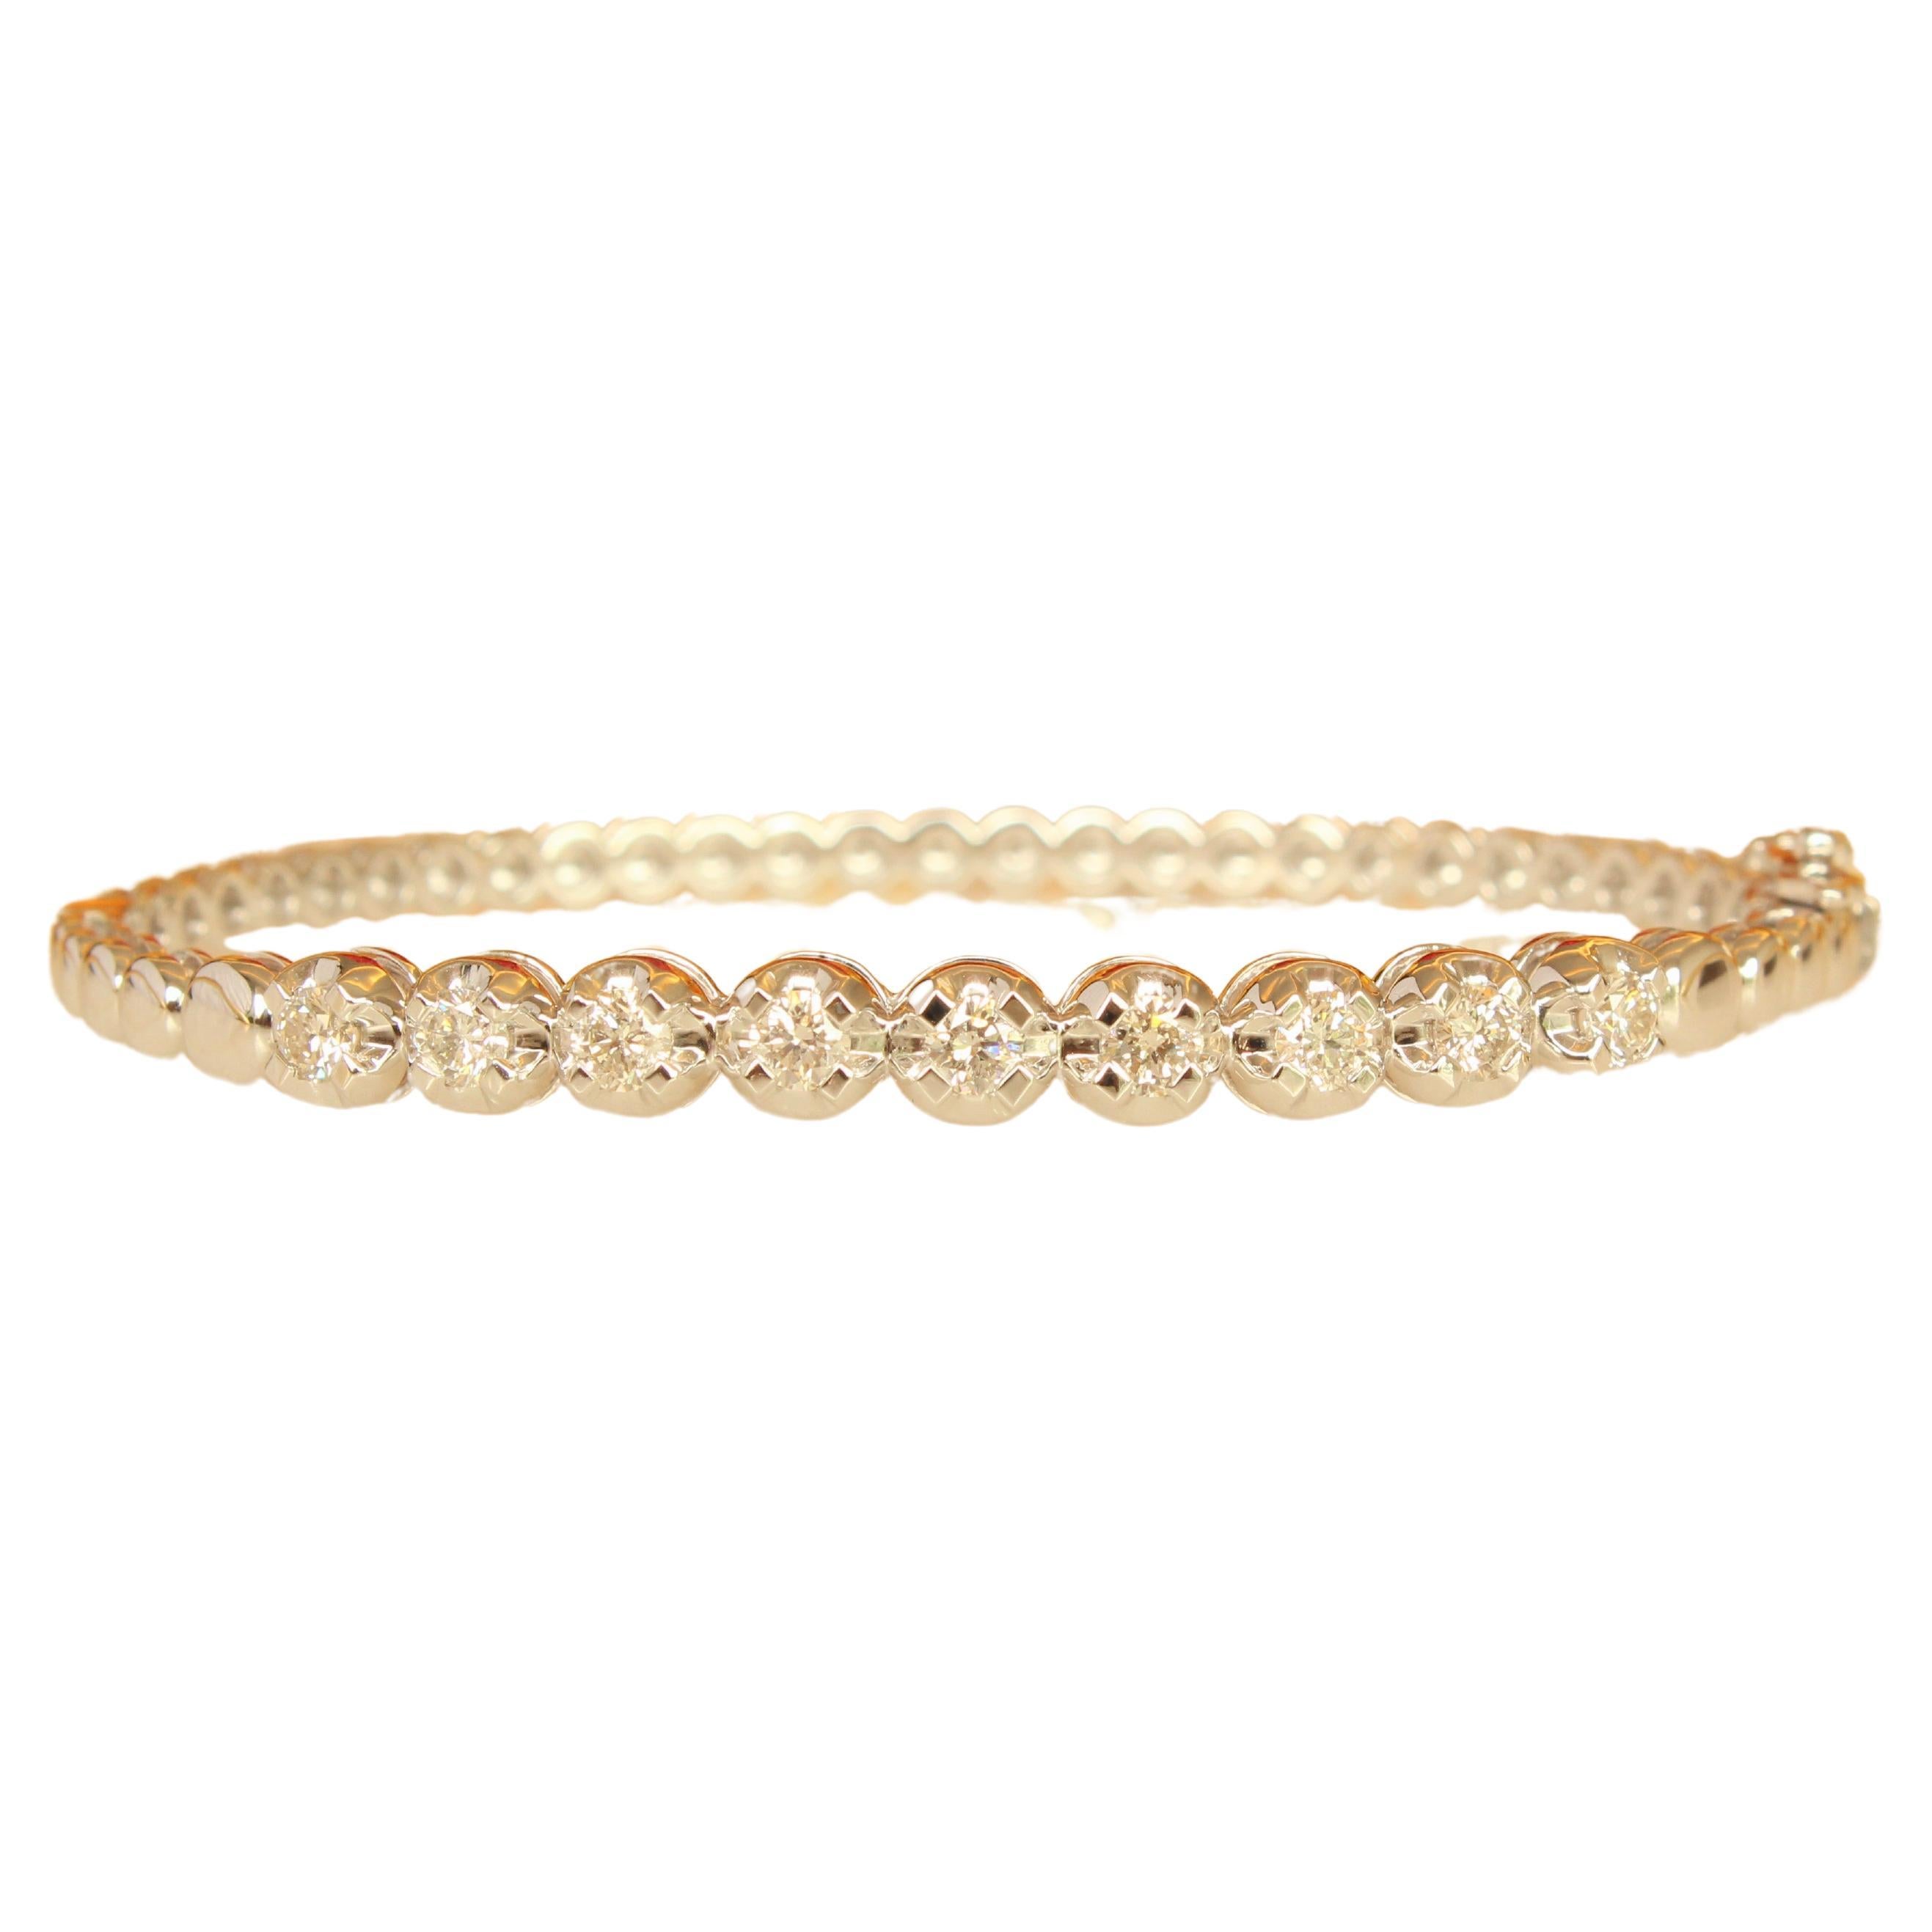 Infinite Shimmer Diamond Bracelet with Illusion Setting set in 18k Solid Gold